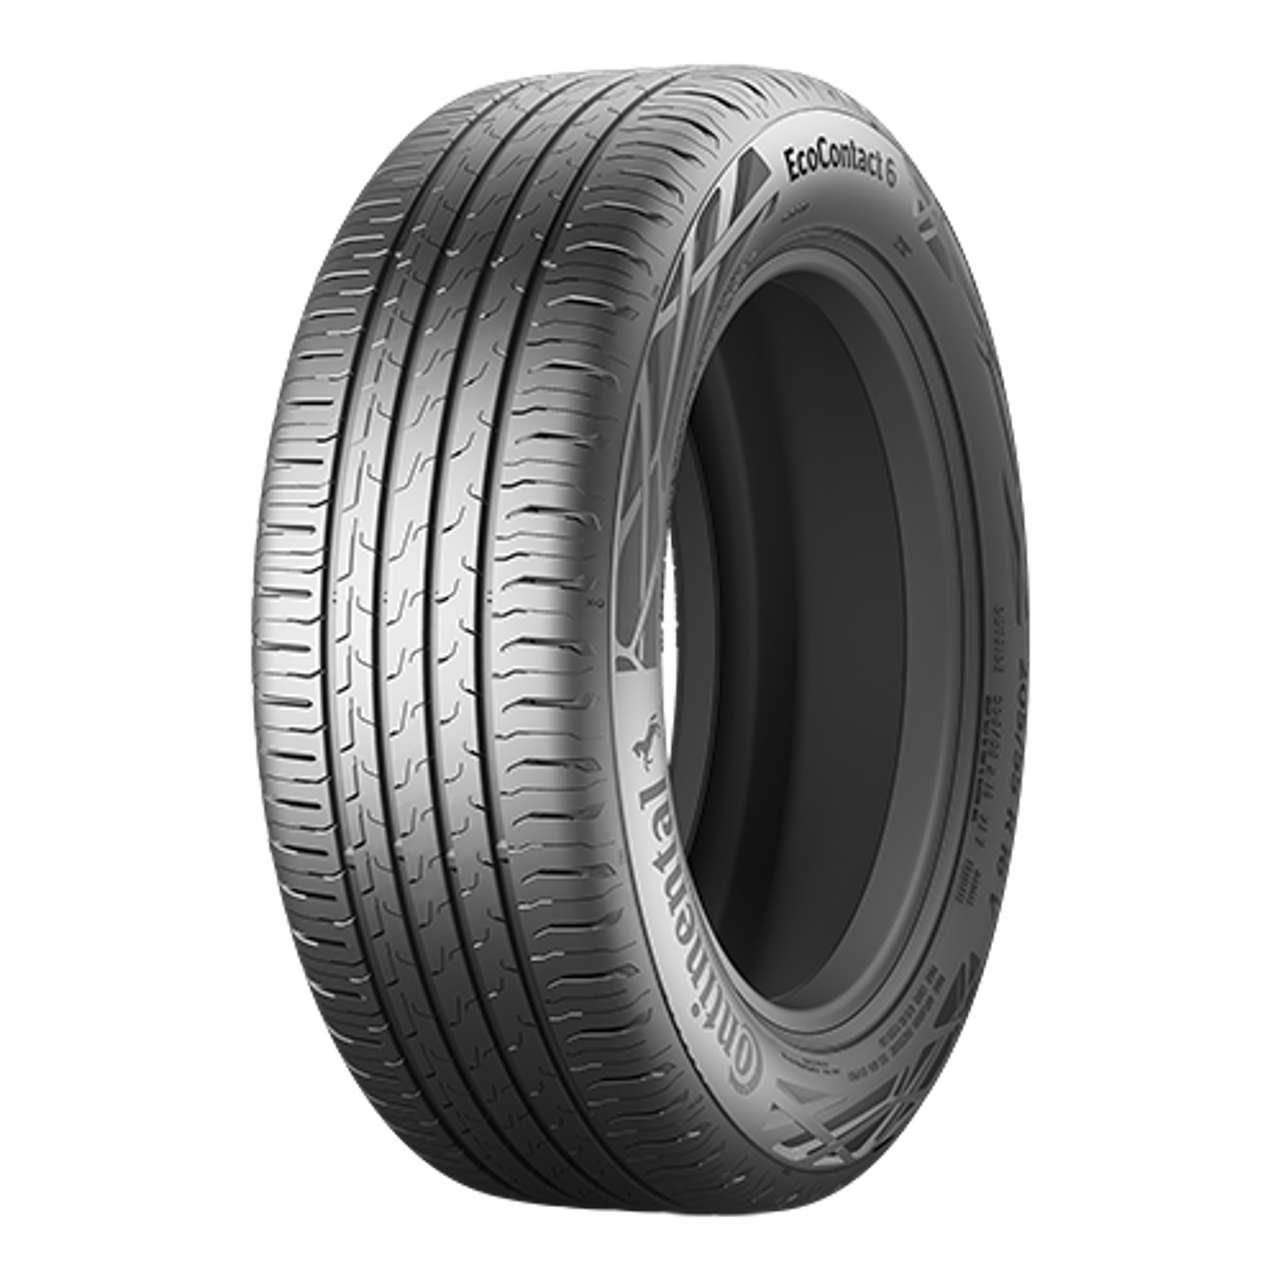 CONTINENTAL ECOCONTACT 6Q (*) (MO) (EVc) 275/35R20 102Y FR BSW